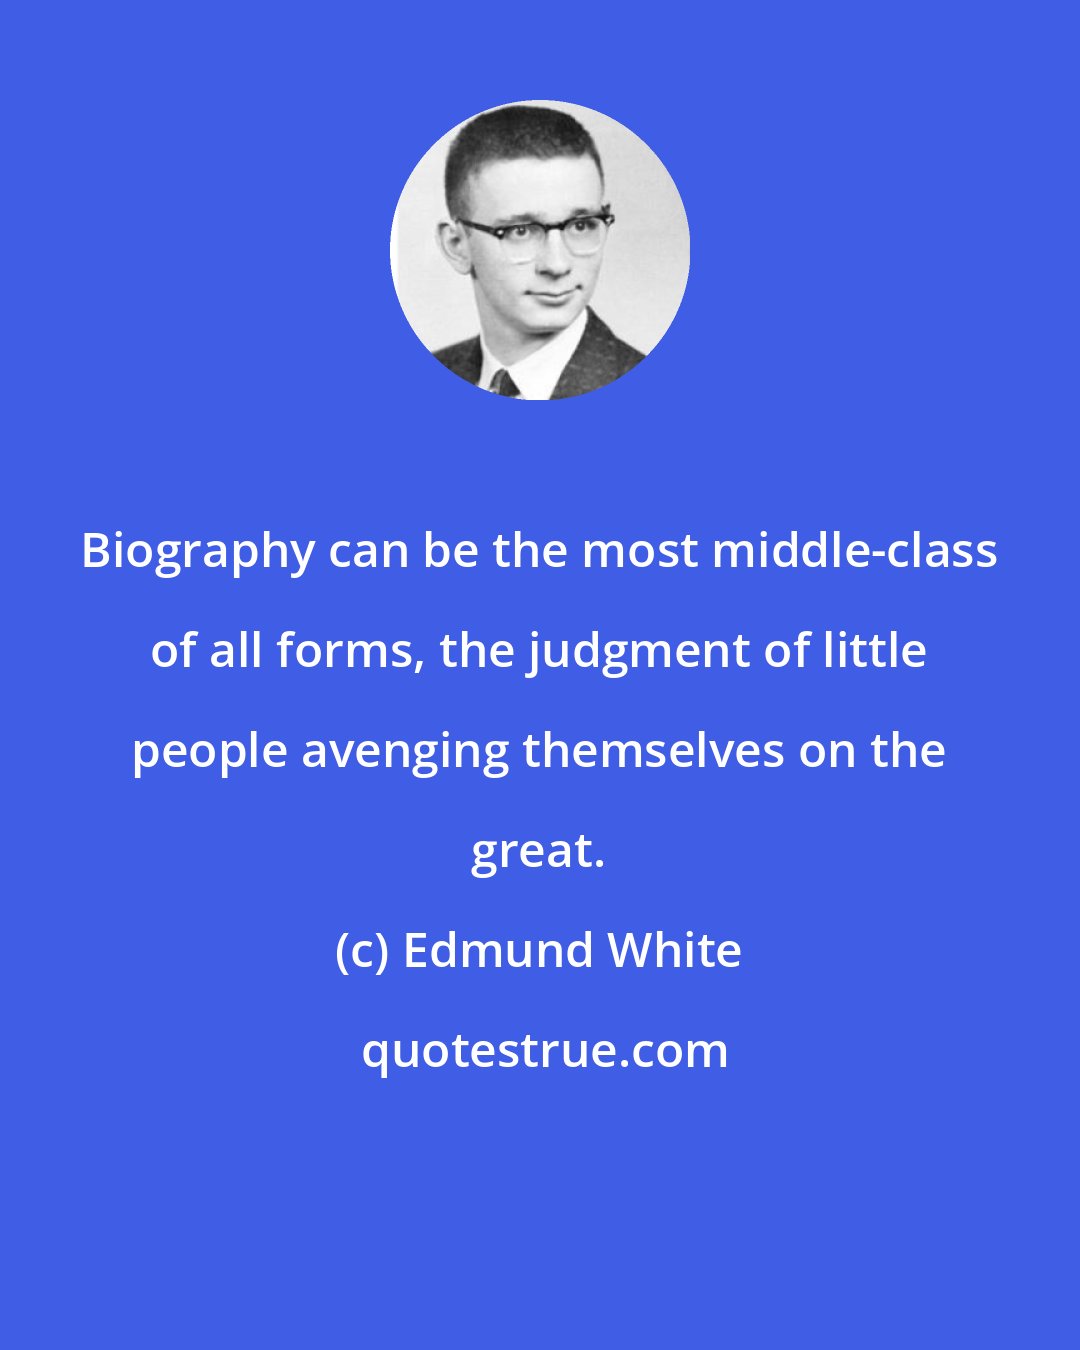 Edmund White: Biography can be the most middle-class of all forms, the judgment of little people avenging themselves on the great.